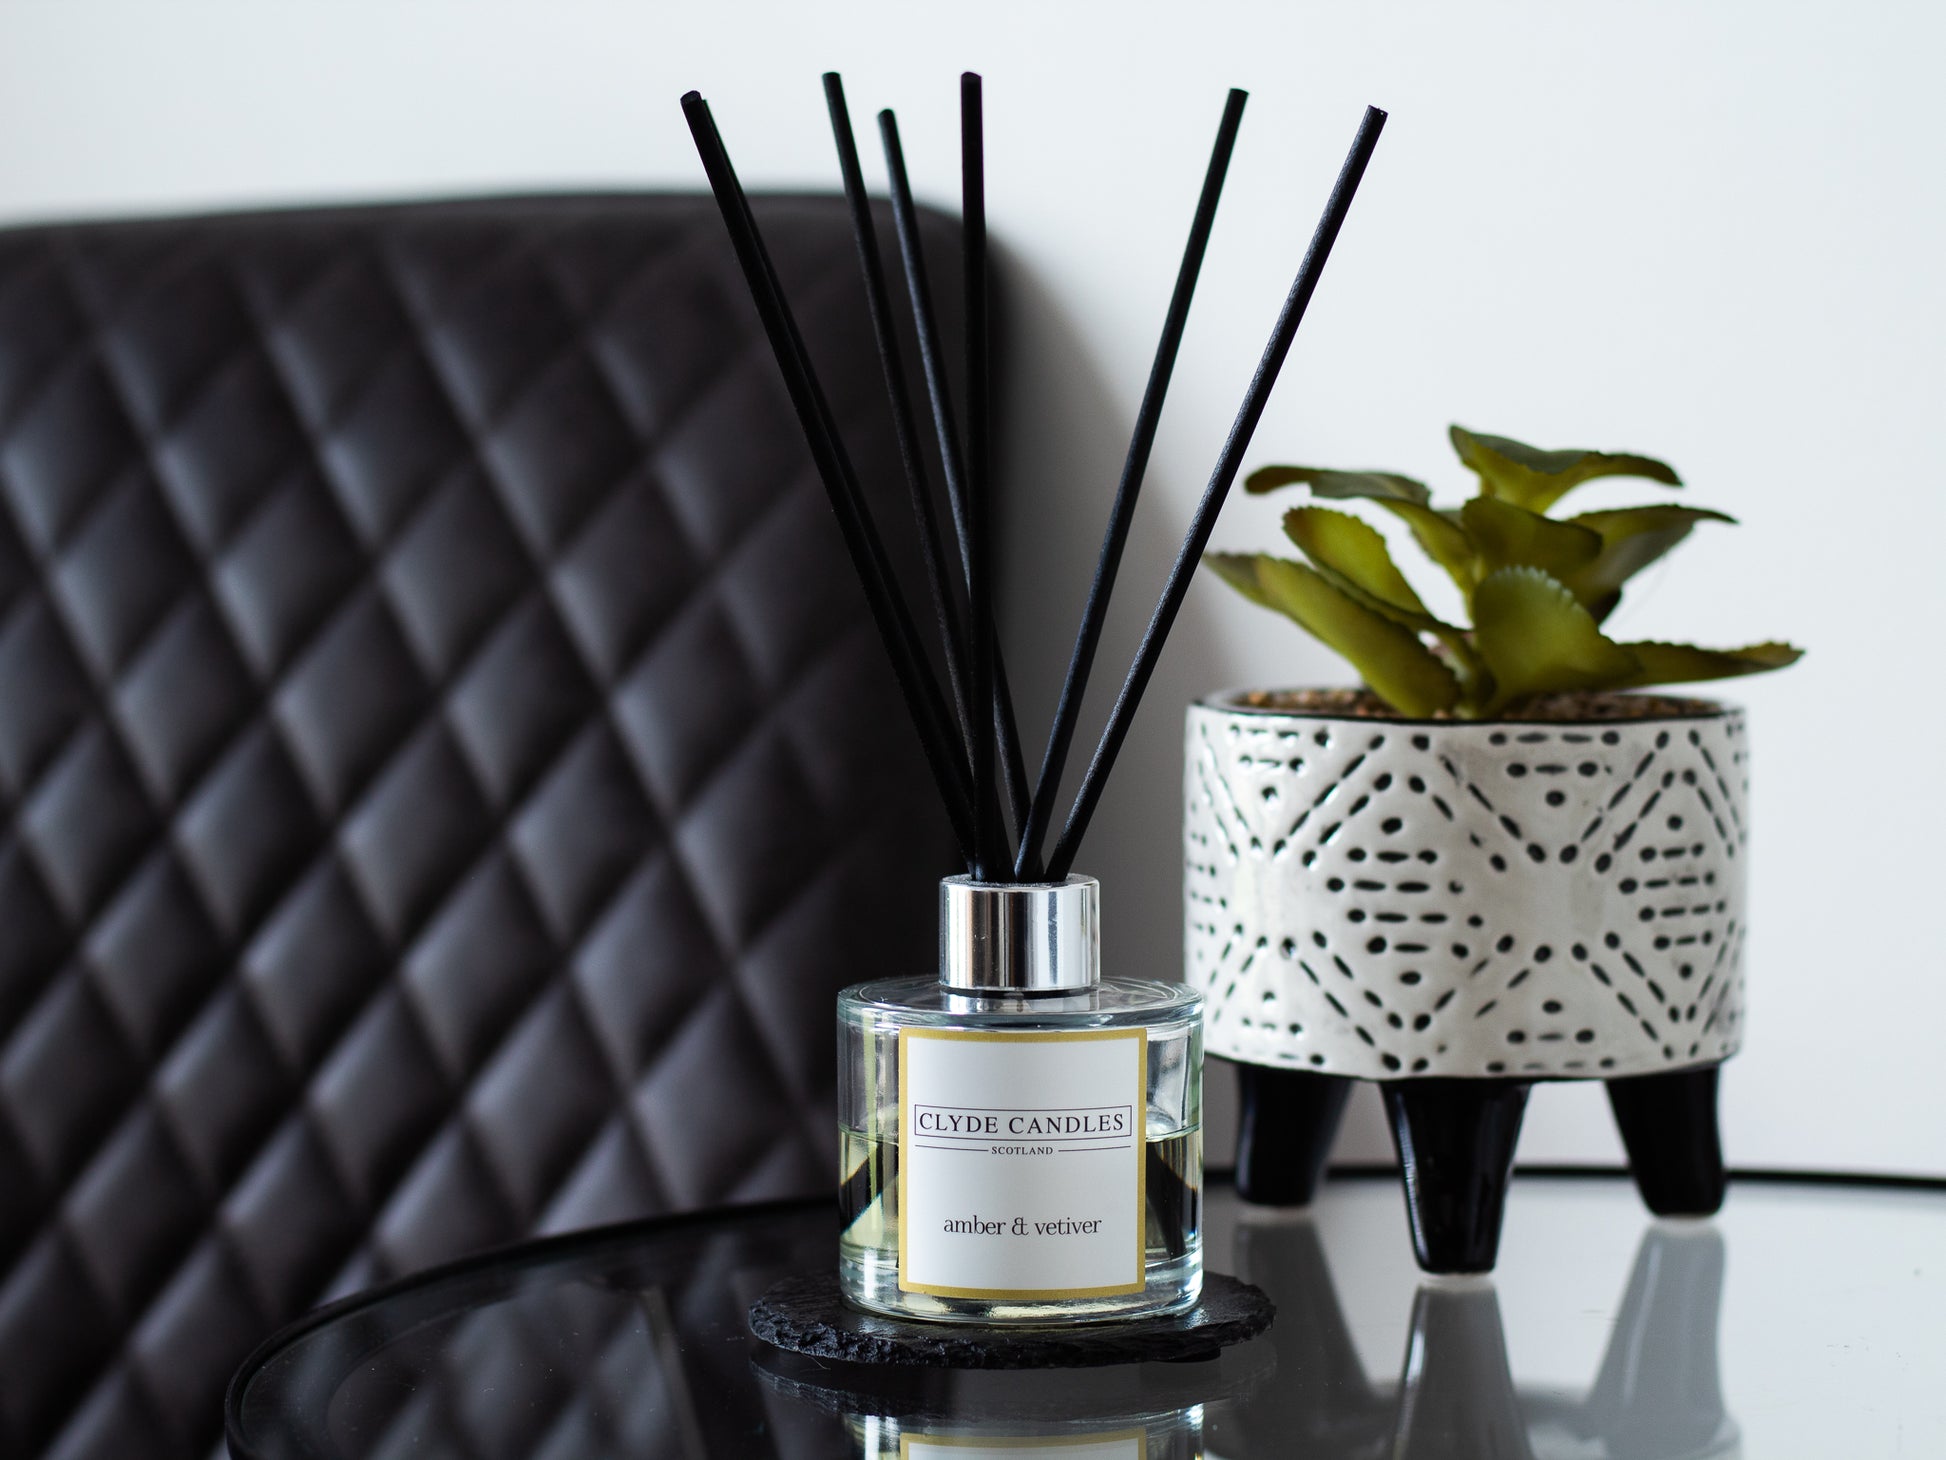 Amber & Vetiver Reed Diffuser - Clyde Candles, Luxury Diffuser Oil with a Set of 7 Fibre Sticks, 100ml, Best Aroma Scent for Home, Kitchen, Living Room, Bathroom. Fragrance Diffusers set with sticks